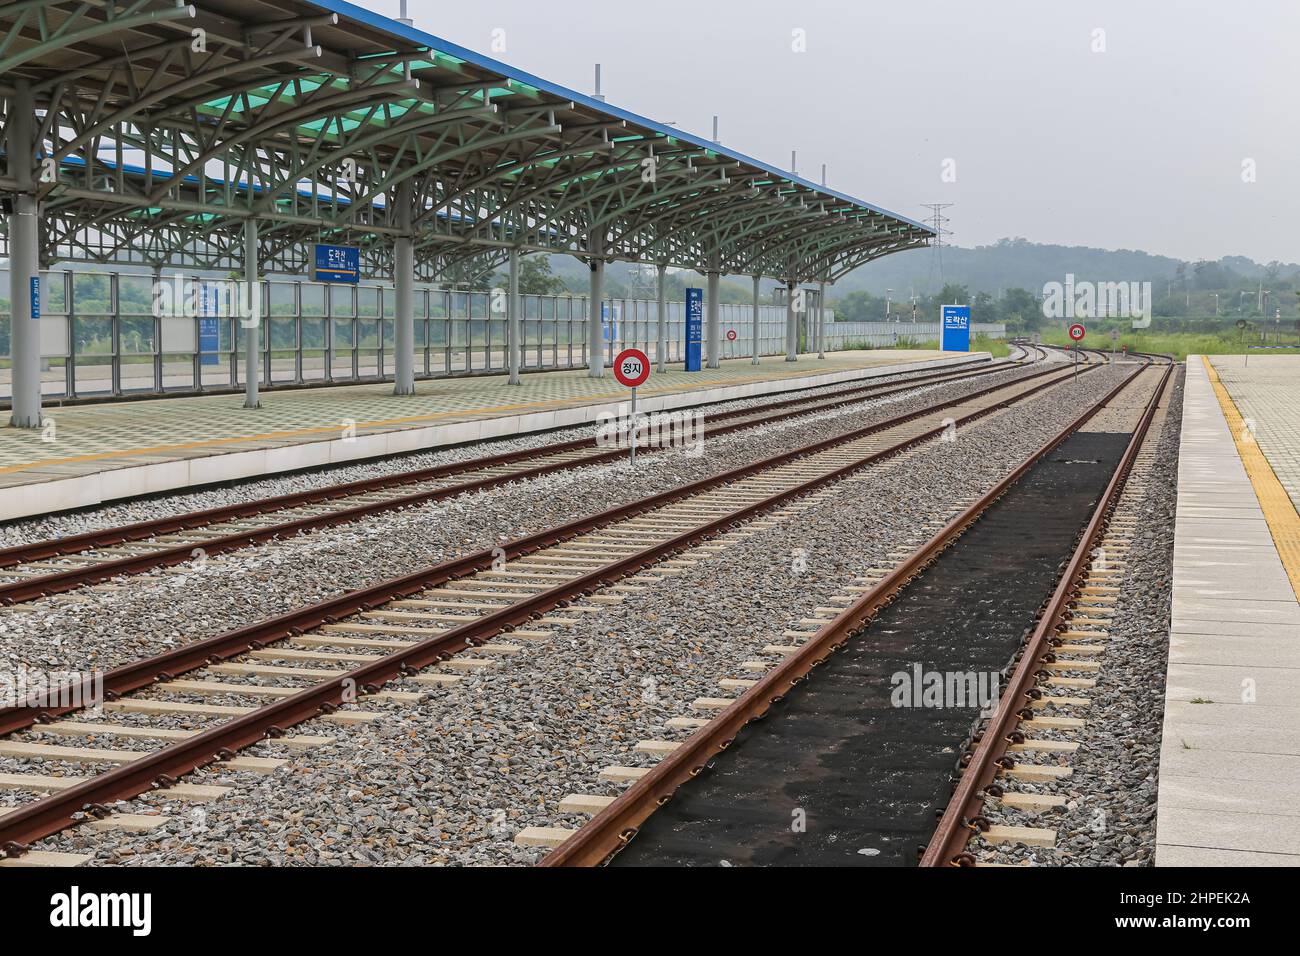 Seoul, South Korea - July 28, 2021: The Dorasan station in the demilitarized zone or DMZ, at the border of South and North Korea. The emptiest train s Stock Photo